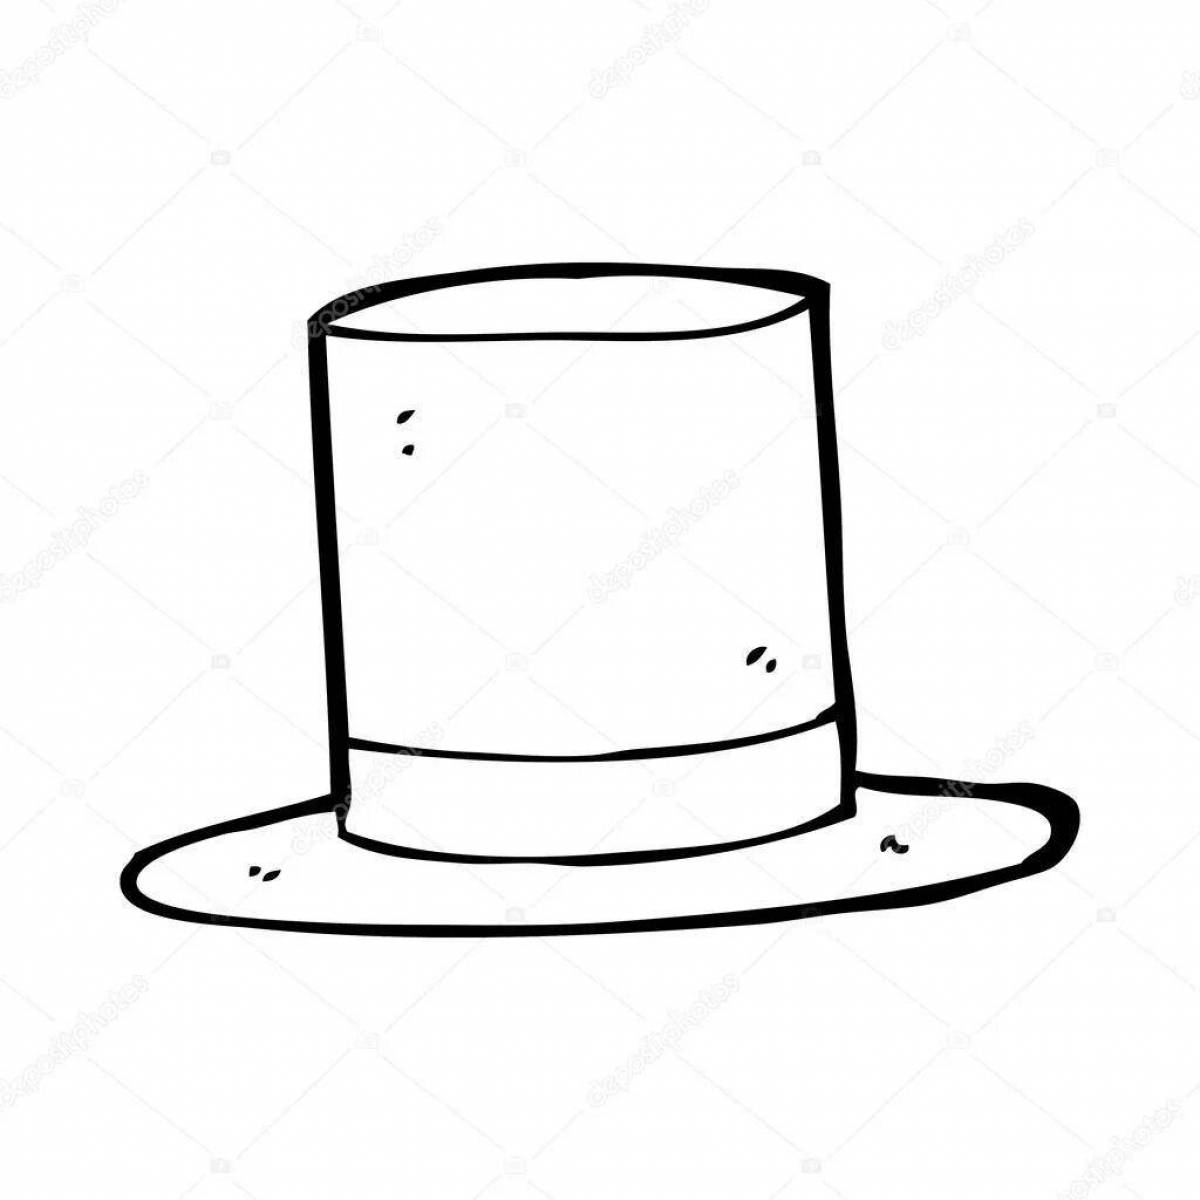 Coloring page funny cylinder hat